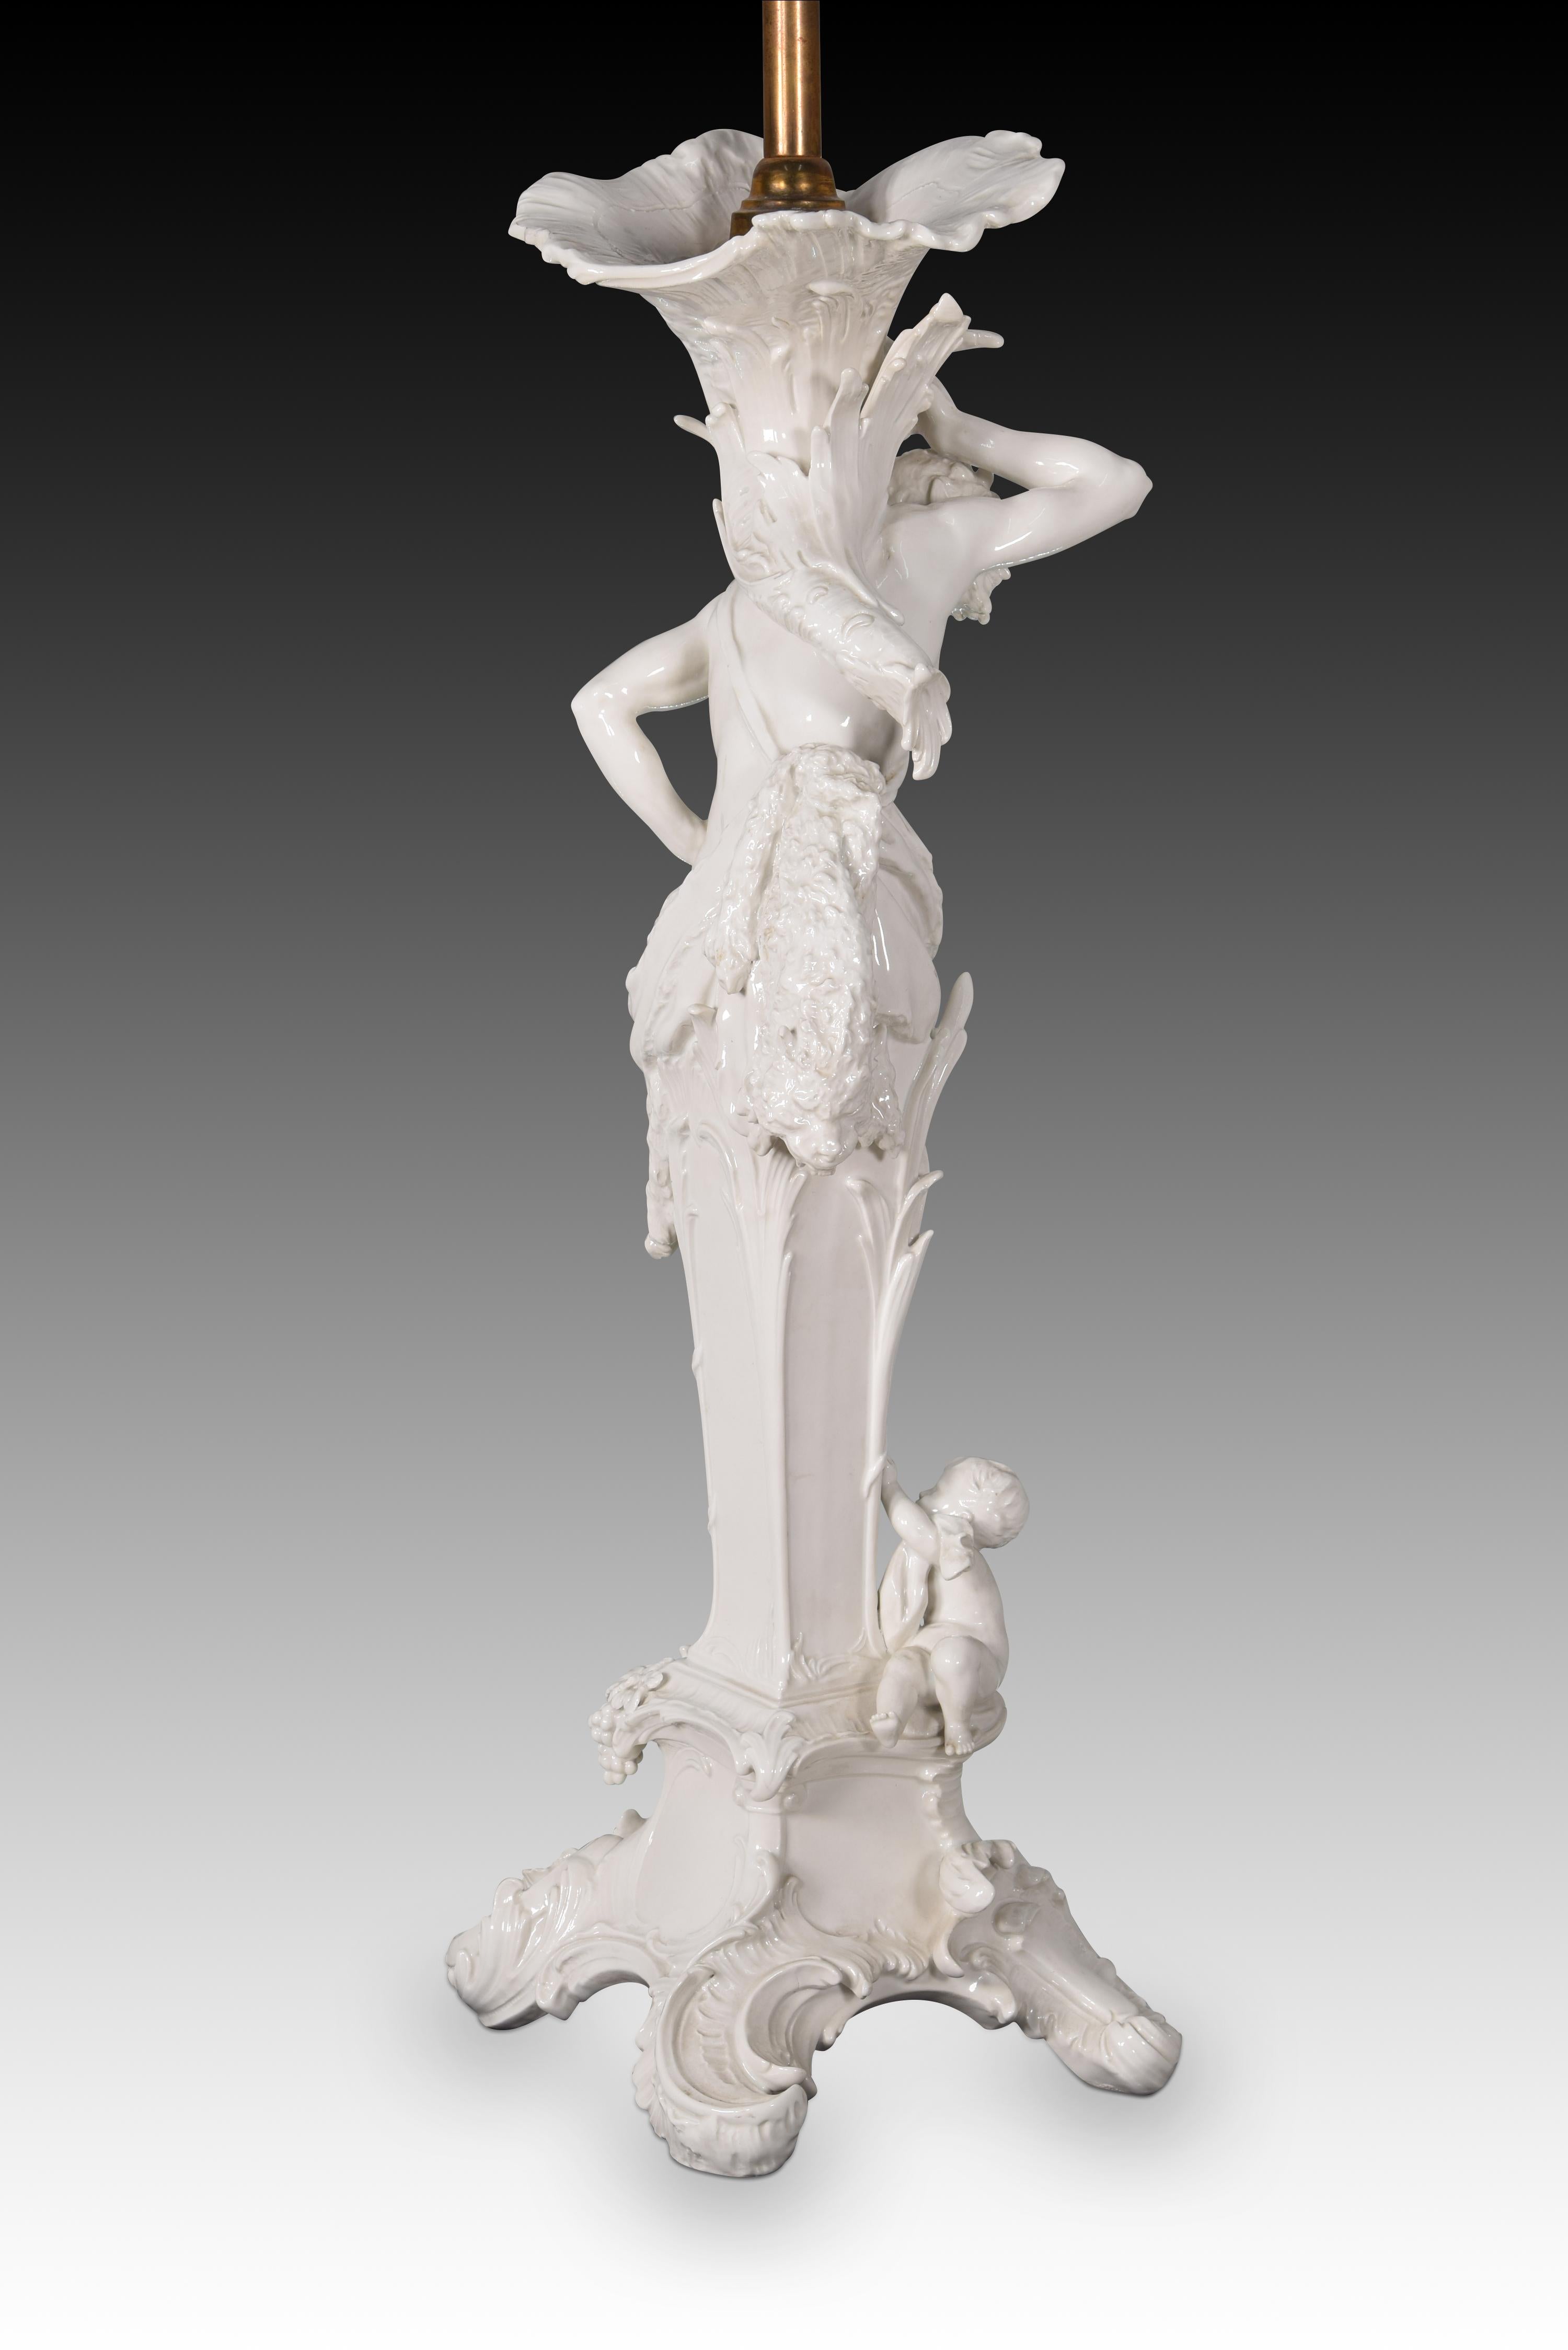 Porcelain Candelabrum Lamp, KPM, Berlin, 19th Century In Good Condition For Sale In Madrid, ES